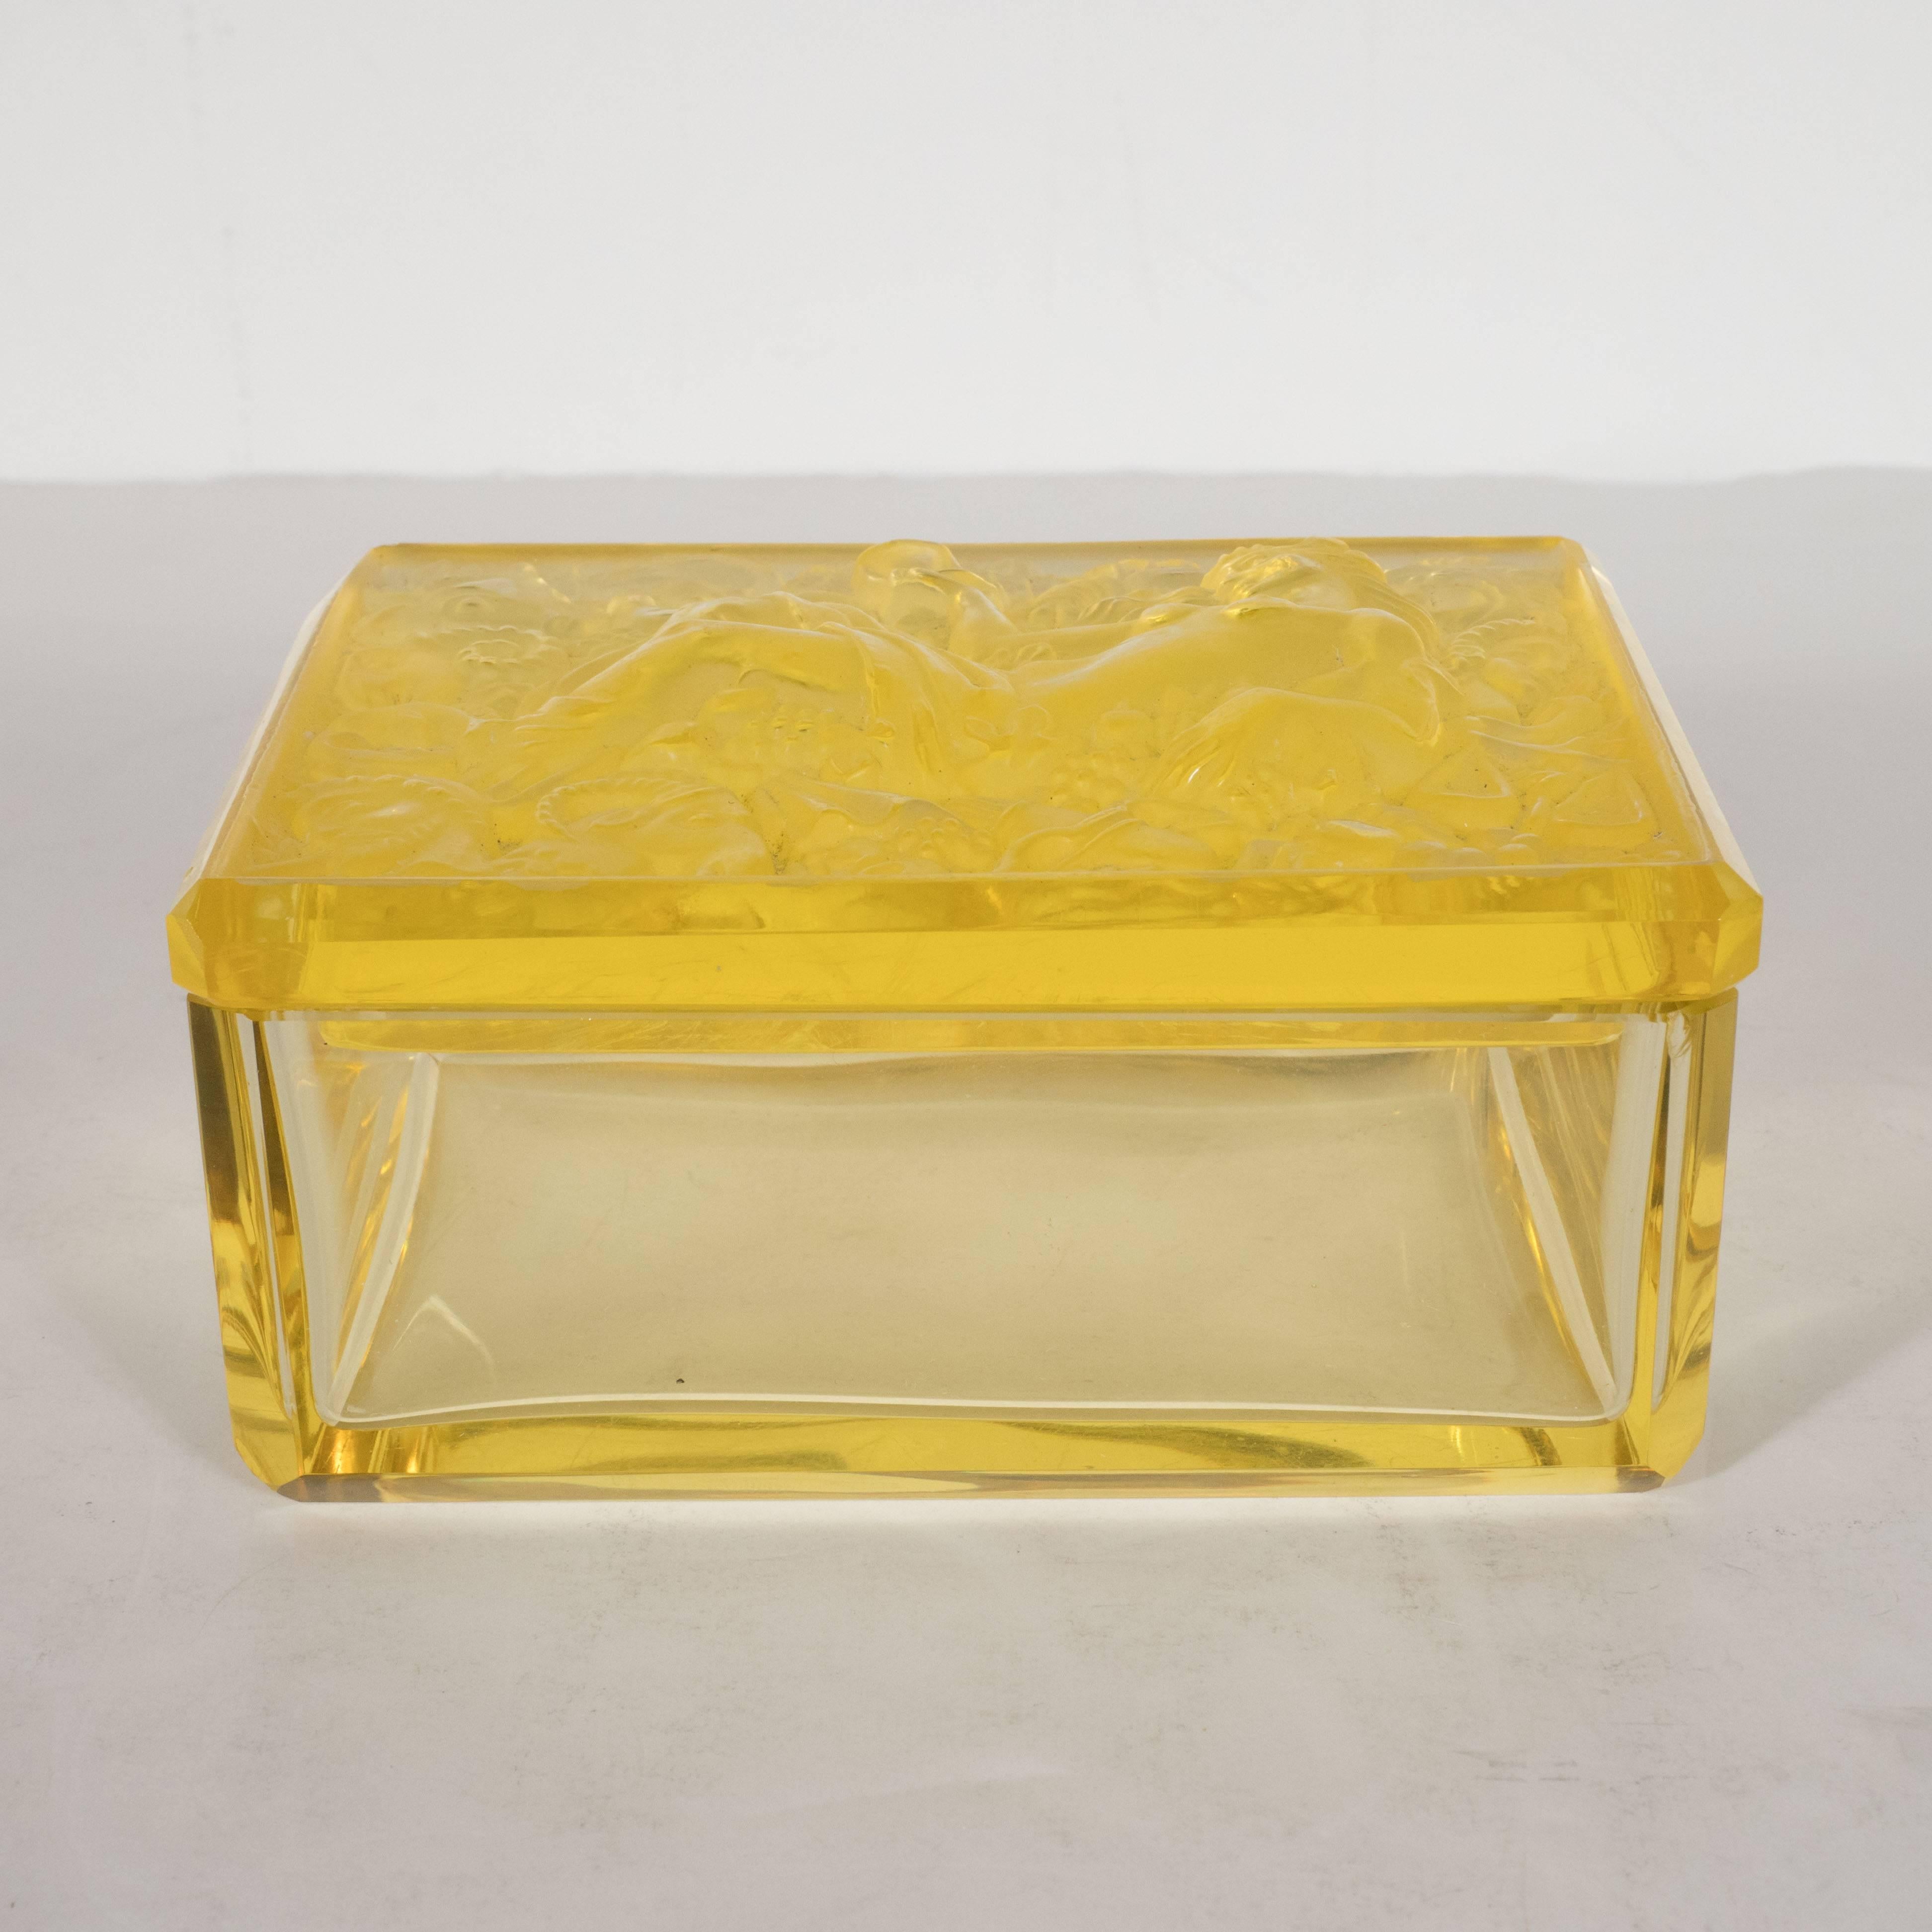 Frosted French Art Deco Citrine Glass Box with Raised Zodiac Motifs